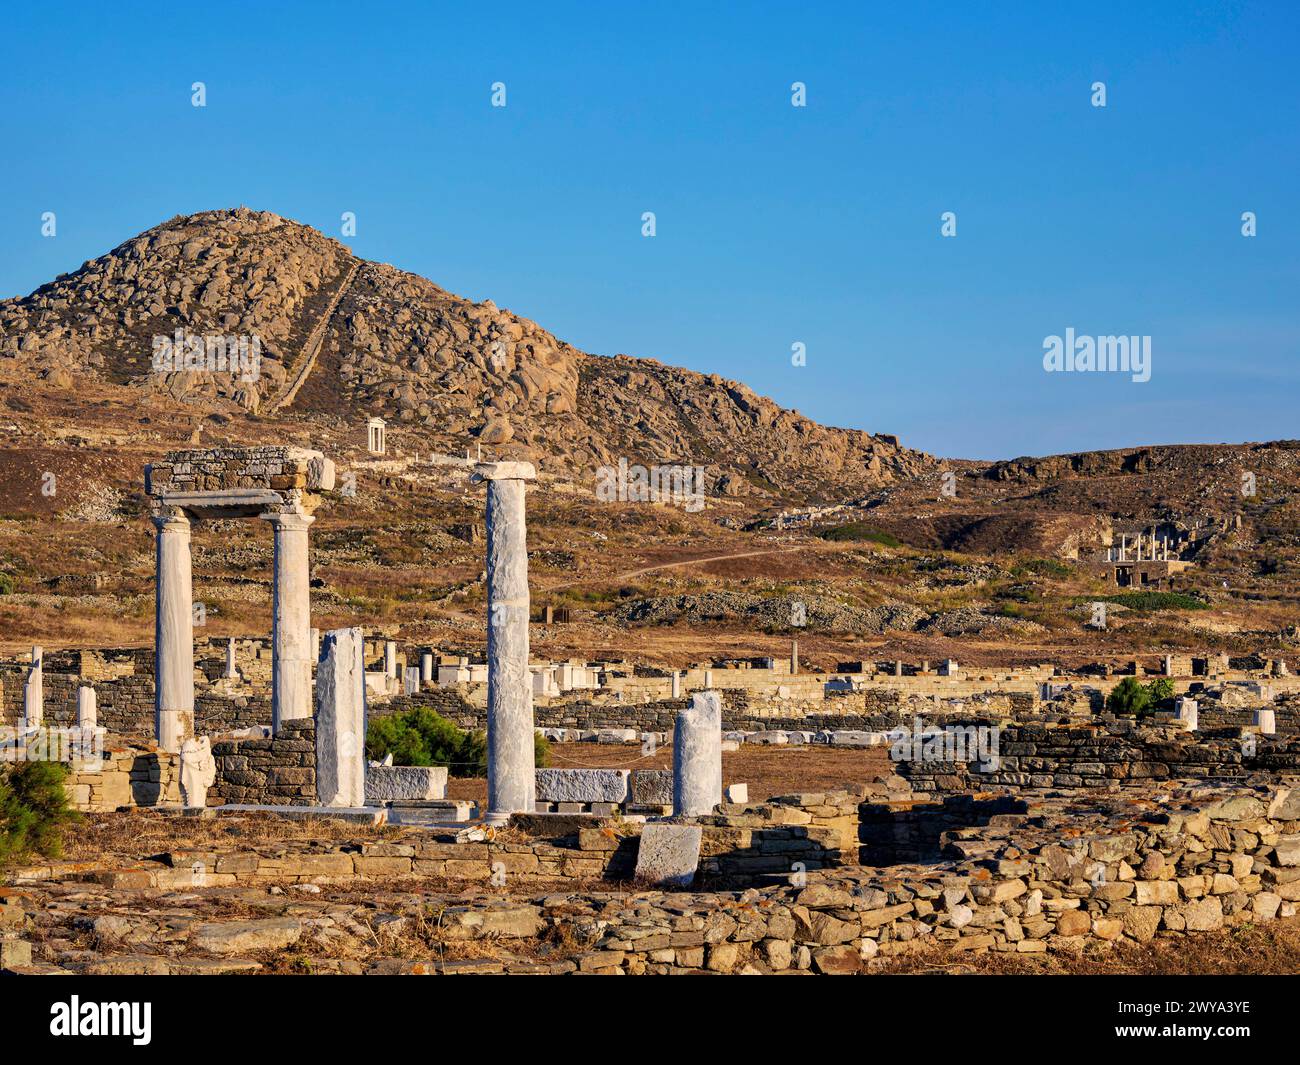 View towards the Mount Kynthos at sunset, Delos Archaeological Site, UNESCO World Heritage Site, Delos Island, Cyclades, Greek Islands, Greece, Europe Stock Photo